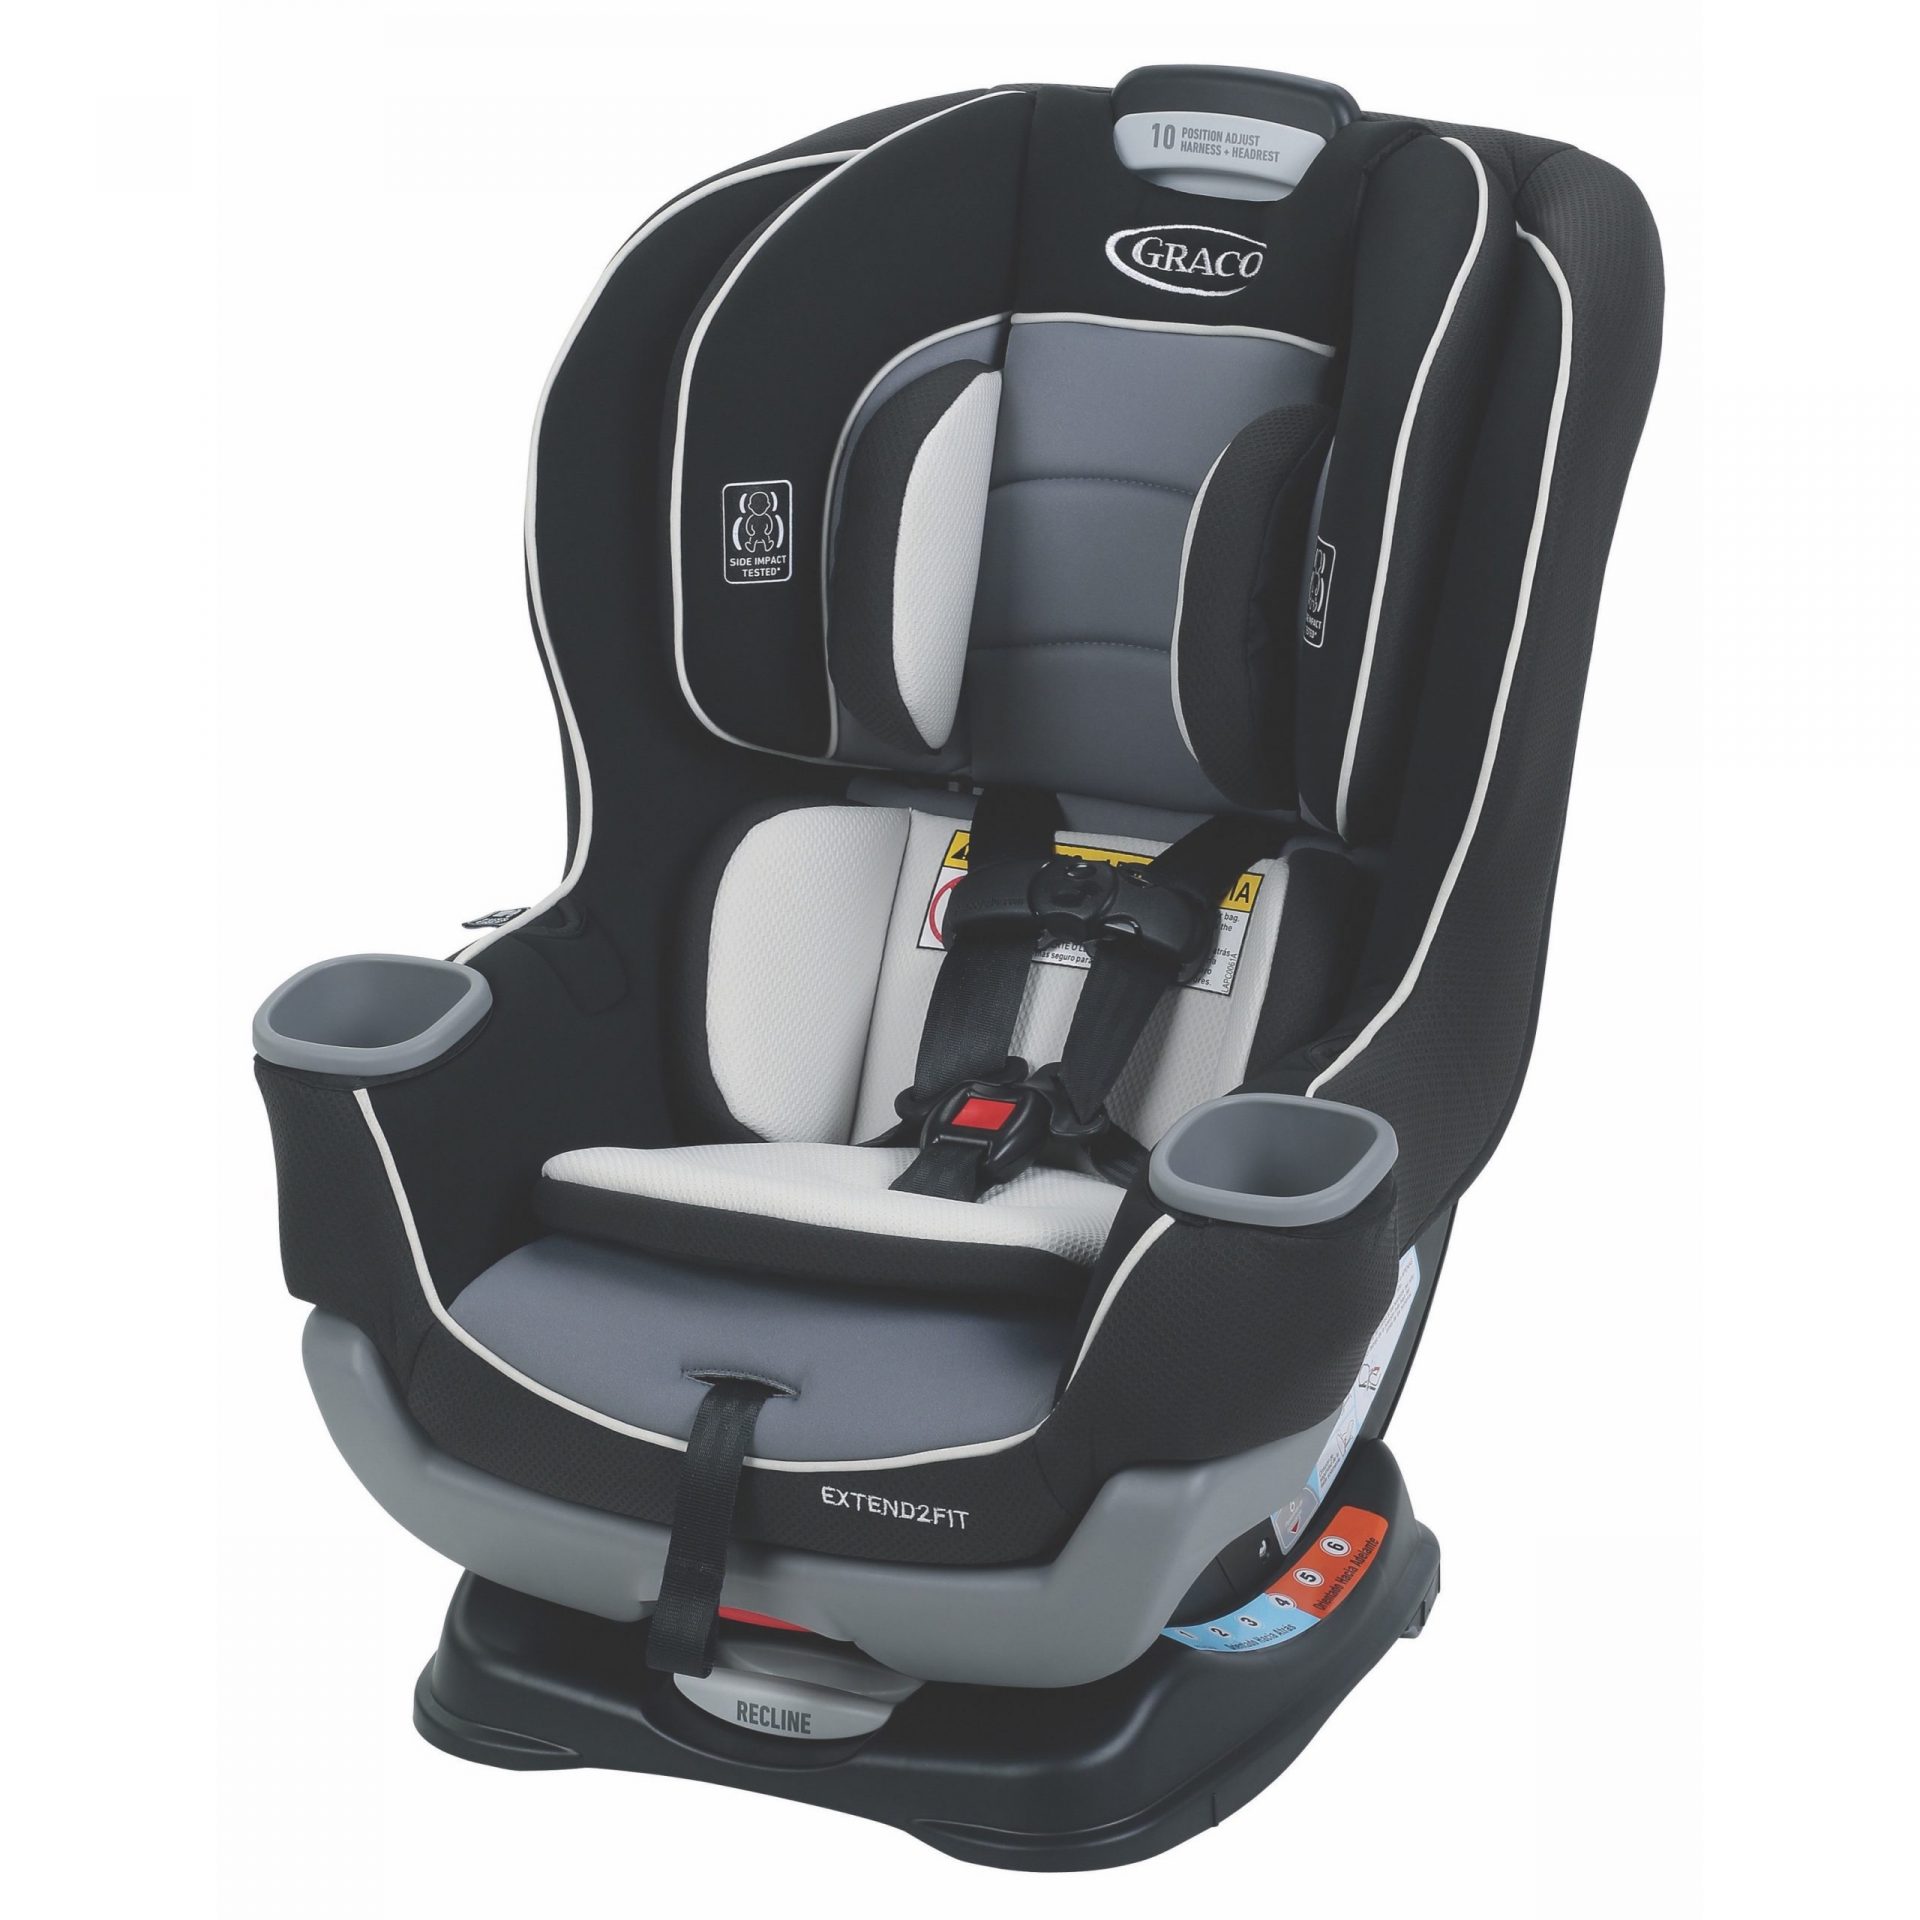 Car Seats Infromation From Paradigm Care & Enrichment Center